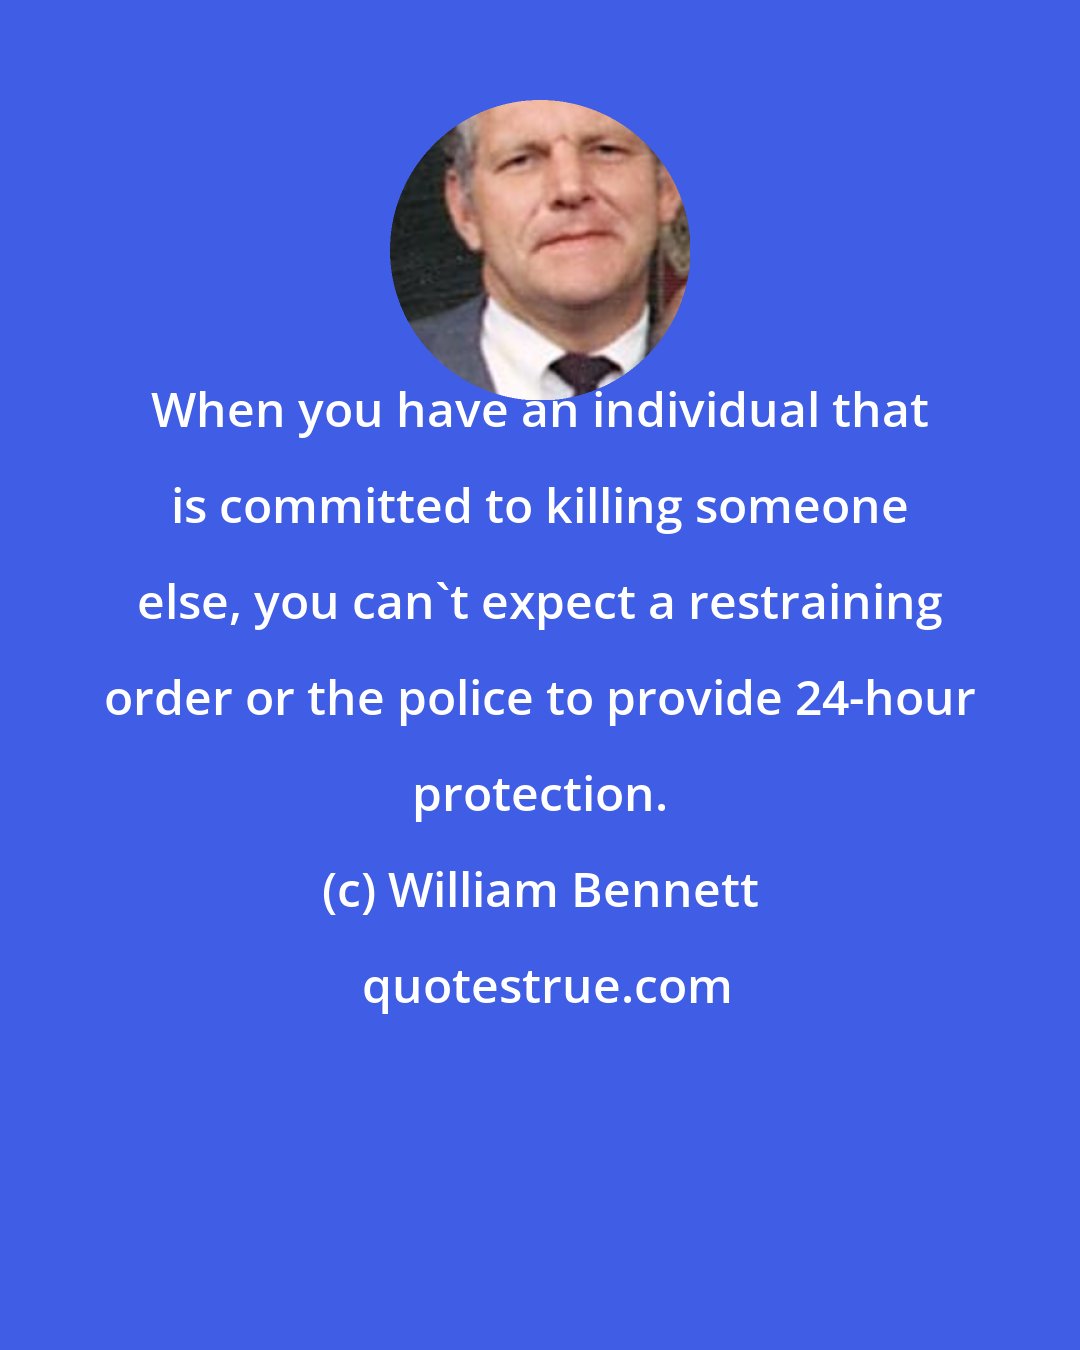 William Bennett: When you have an individual that is committed to killing someone else, you can`t expect a restraining order or the police to provide 24-hour protection.